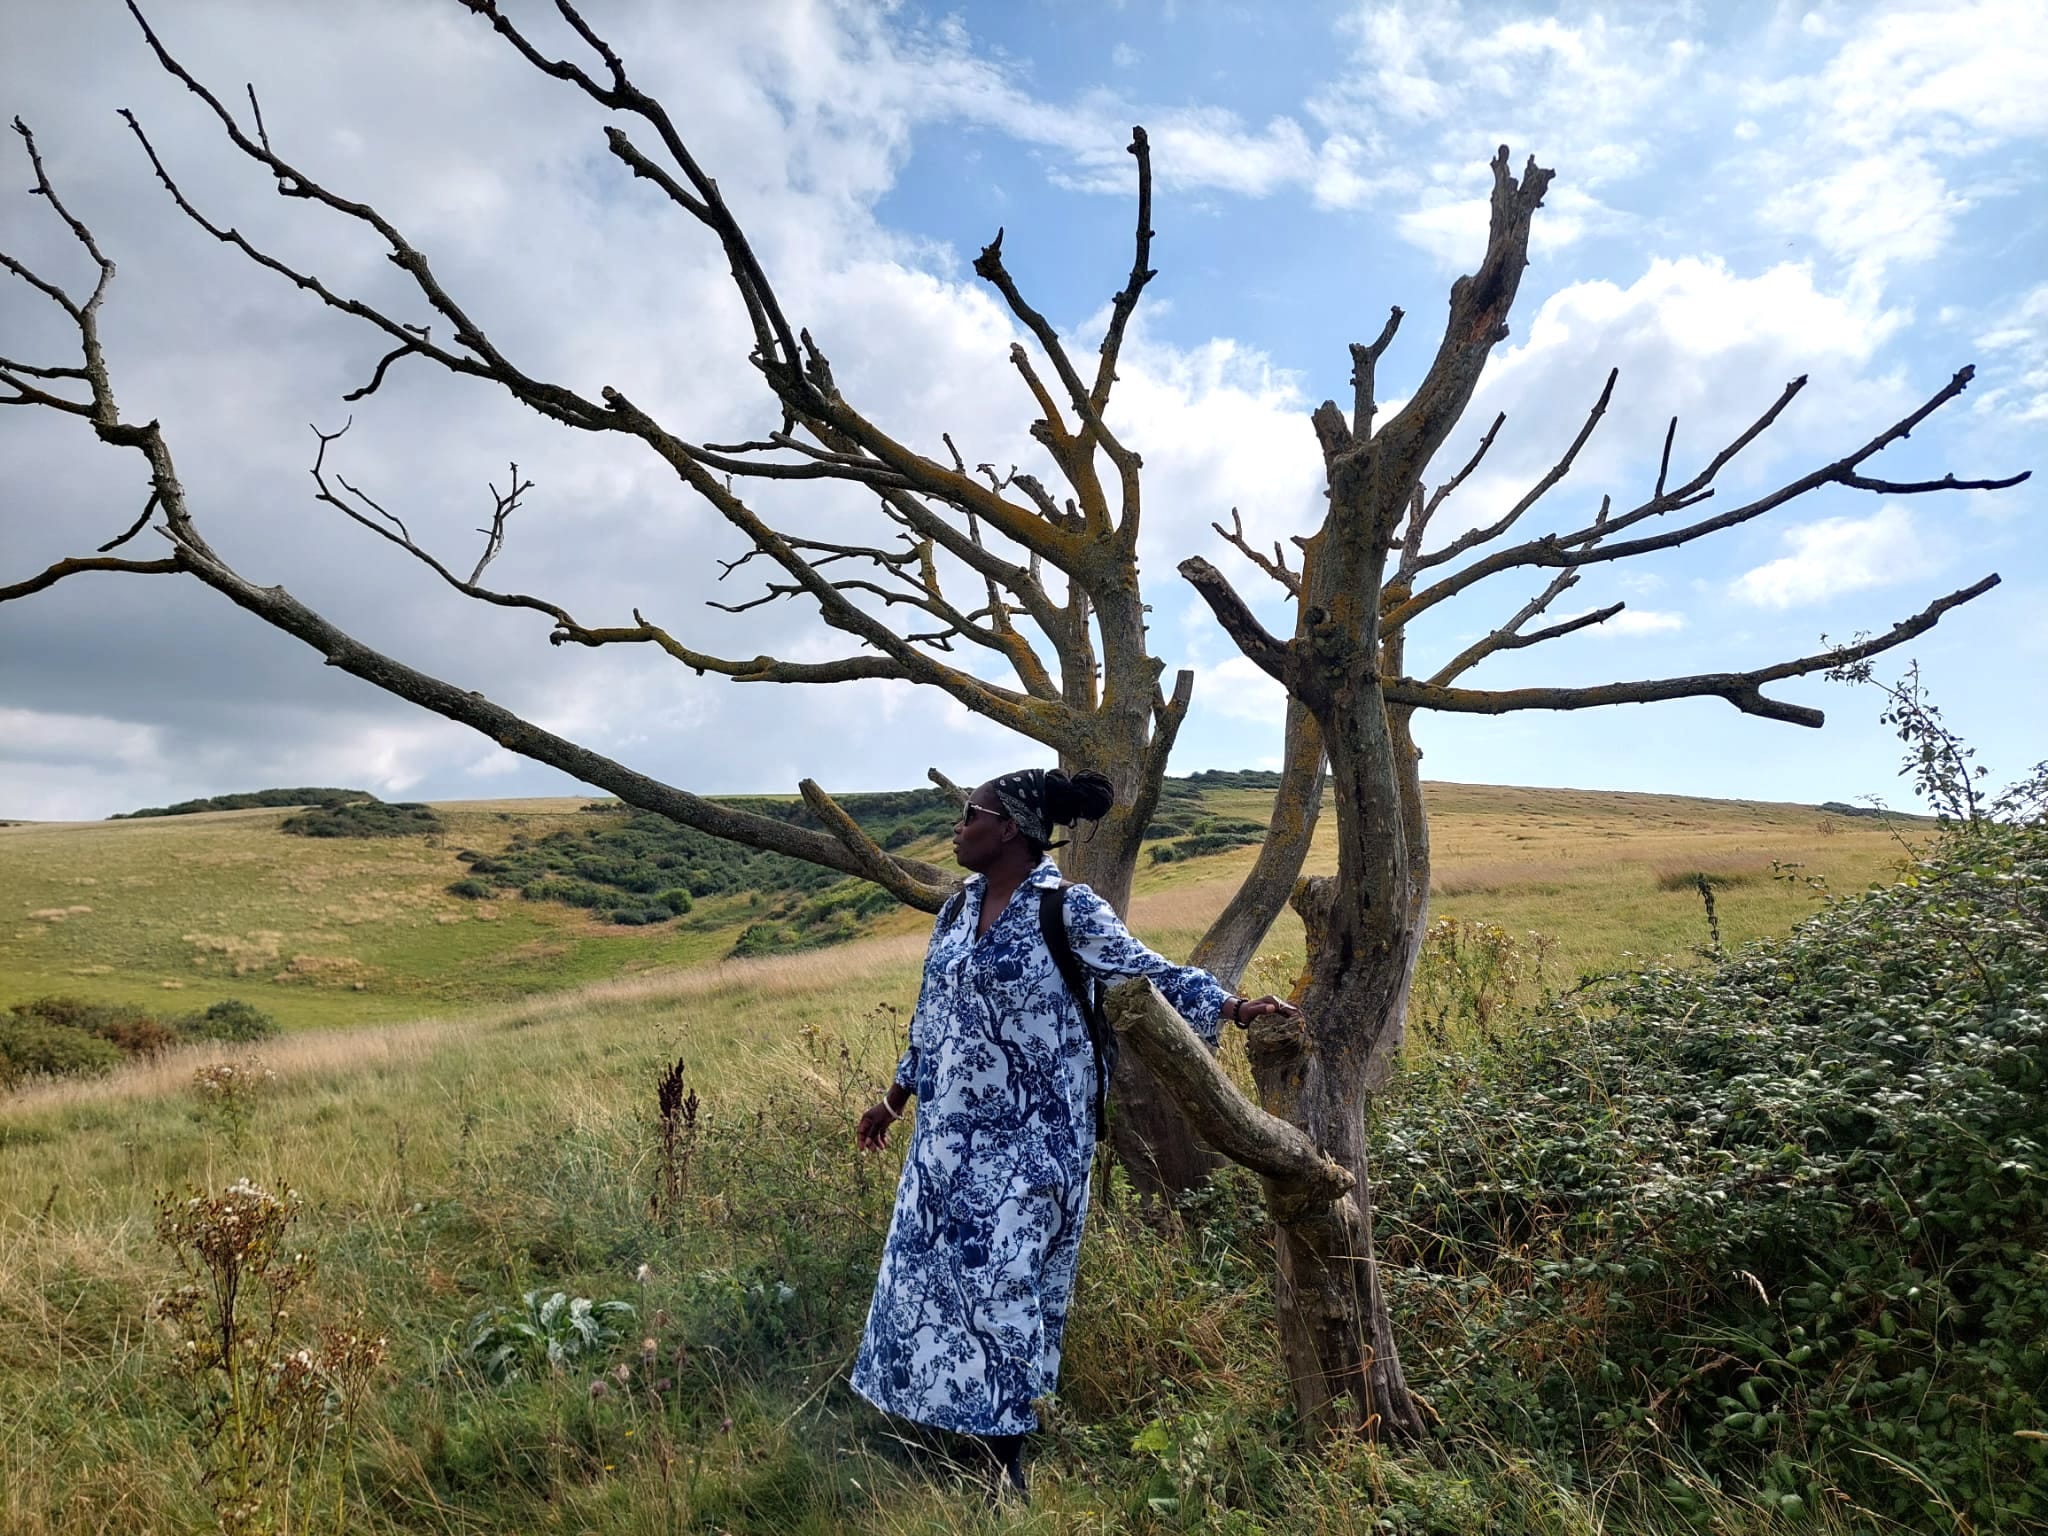 A black woman standing next to a tree in a rural landscape